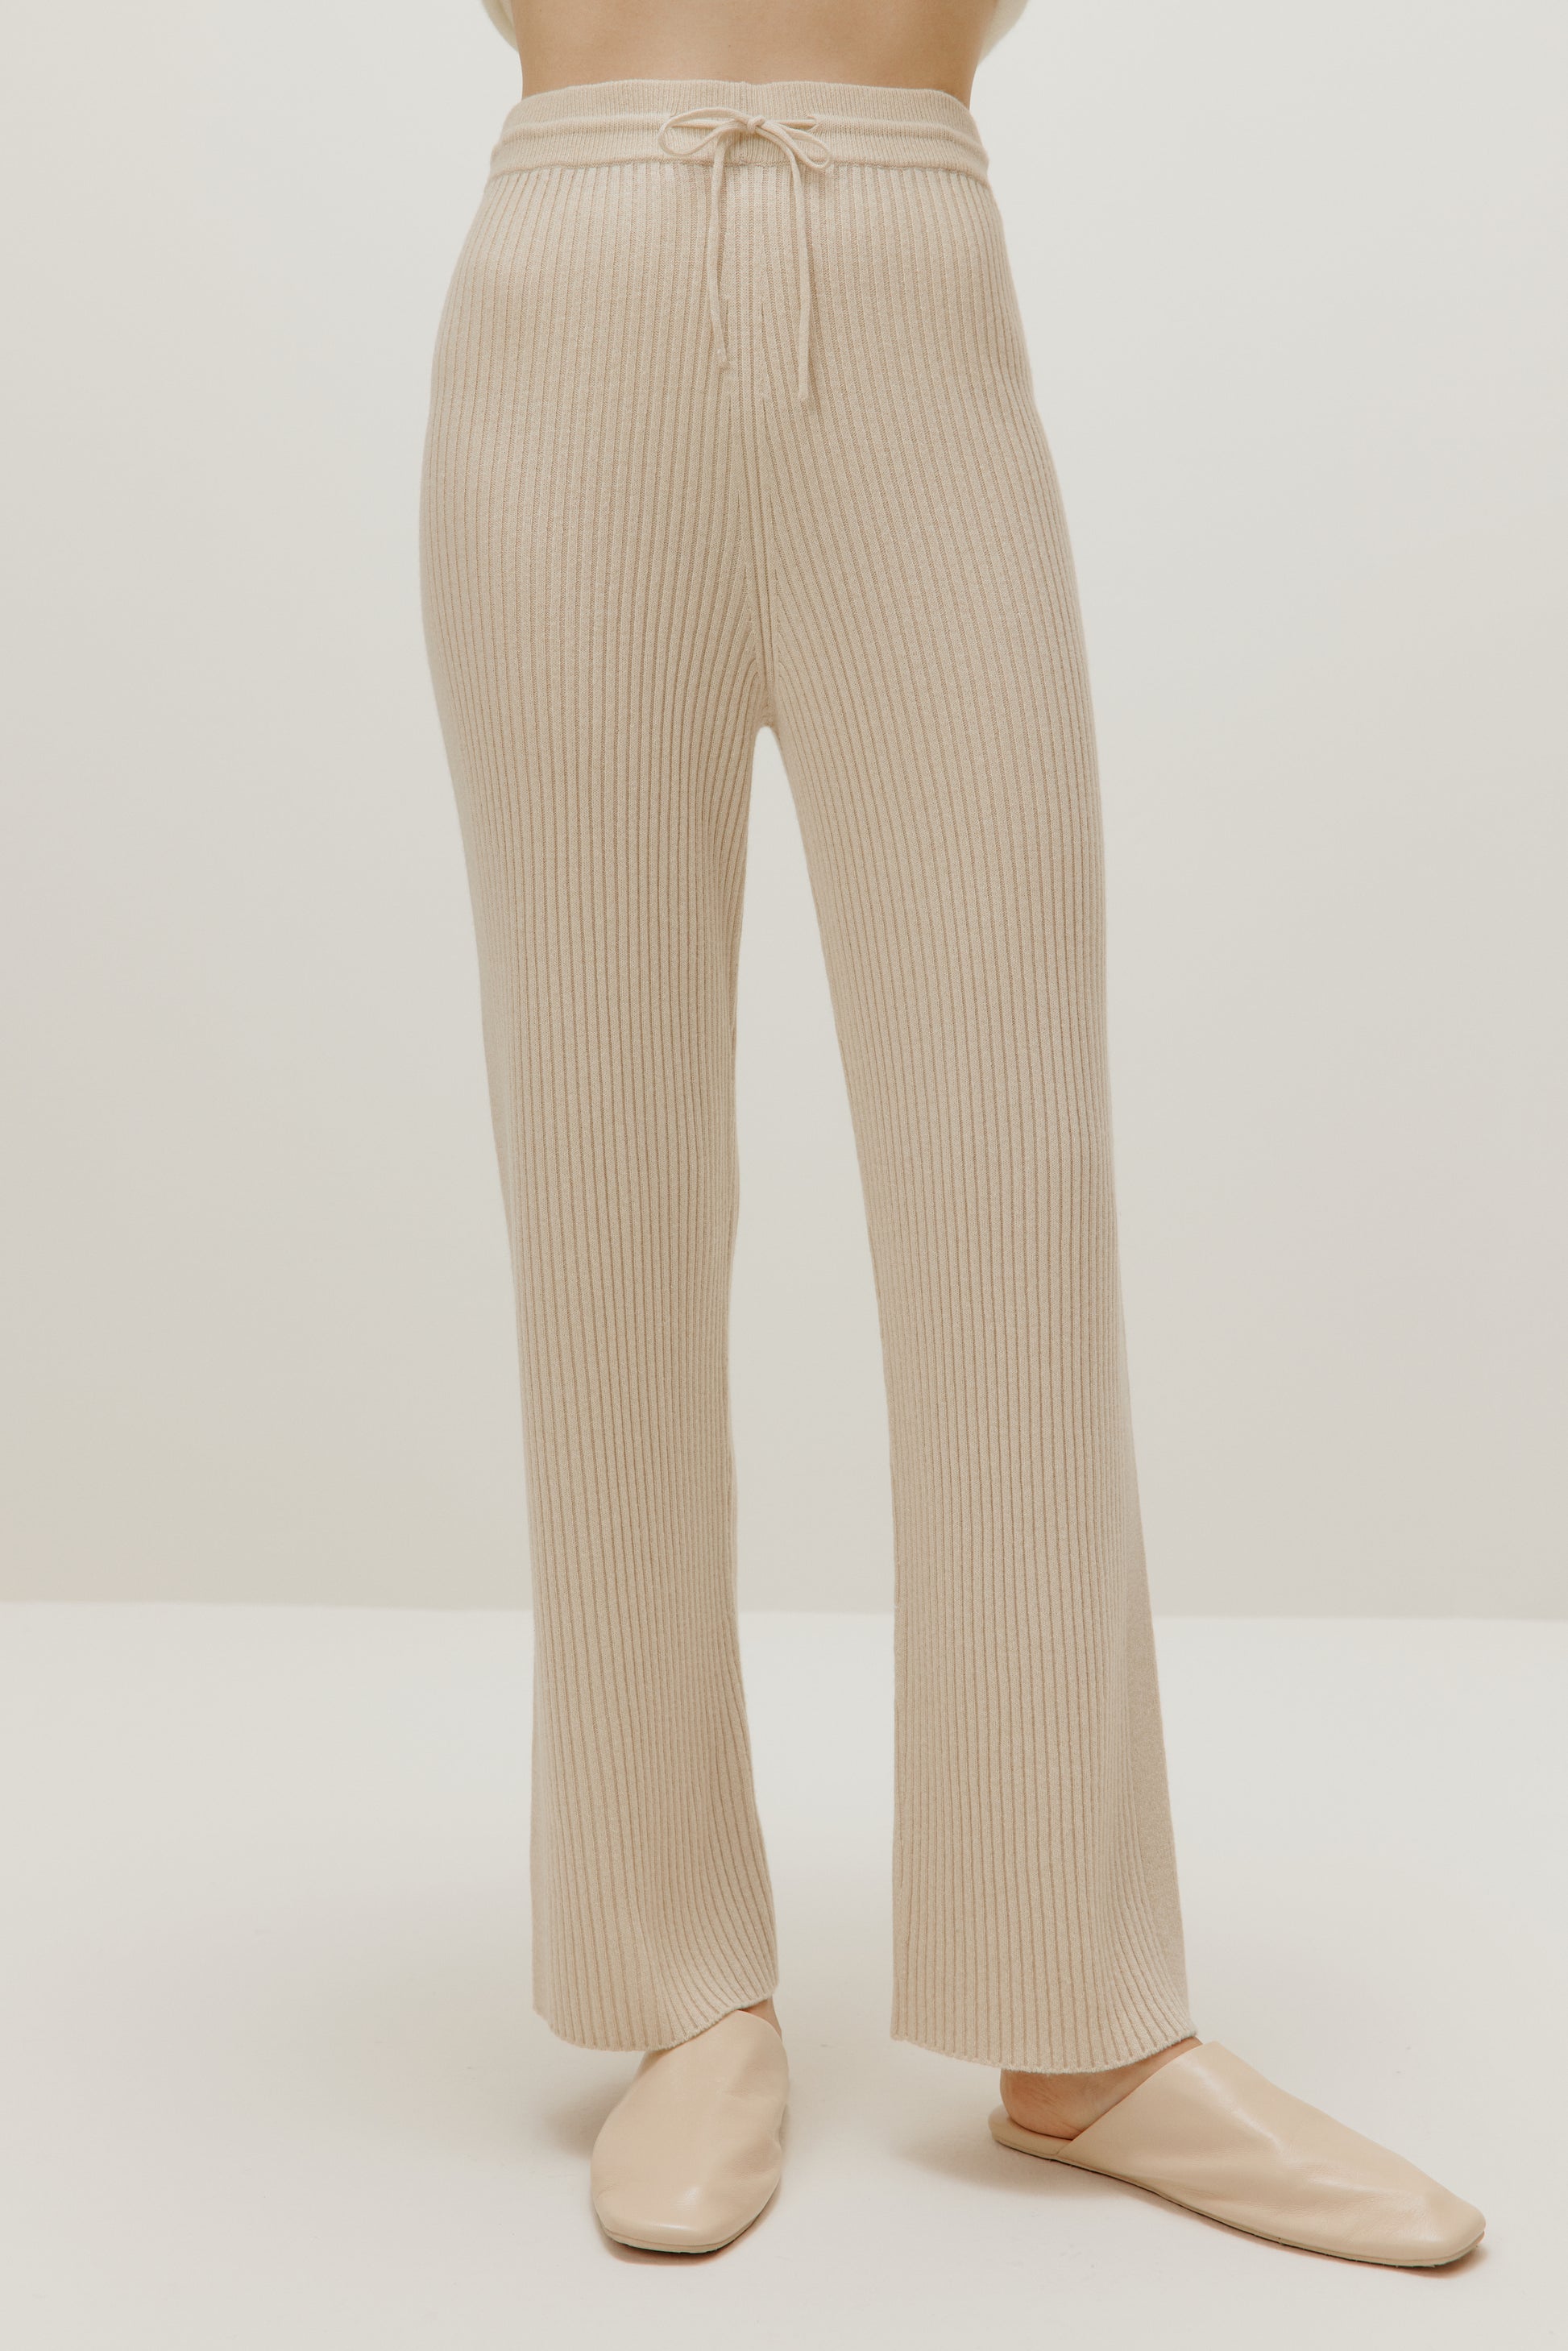 ivory flare knitted pants